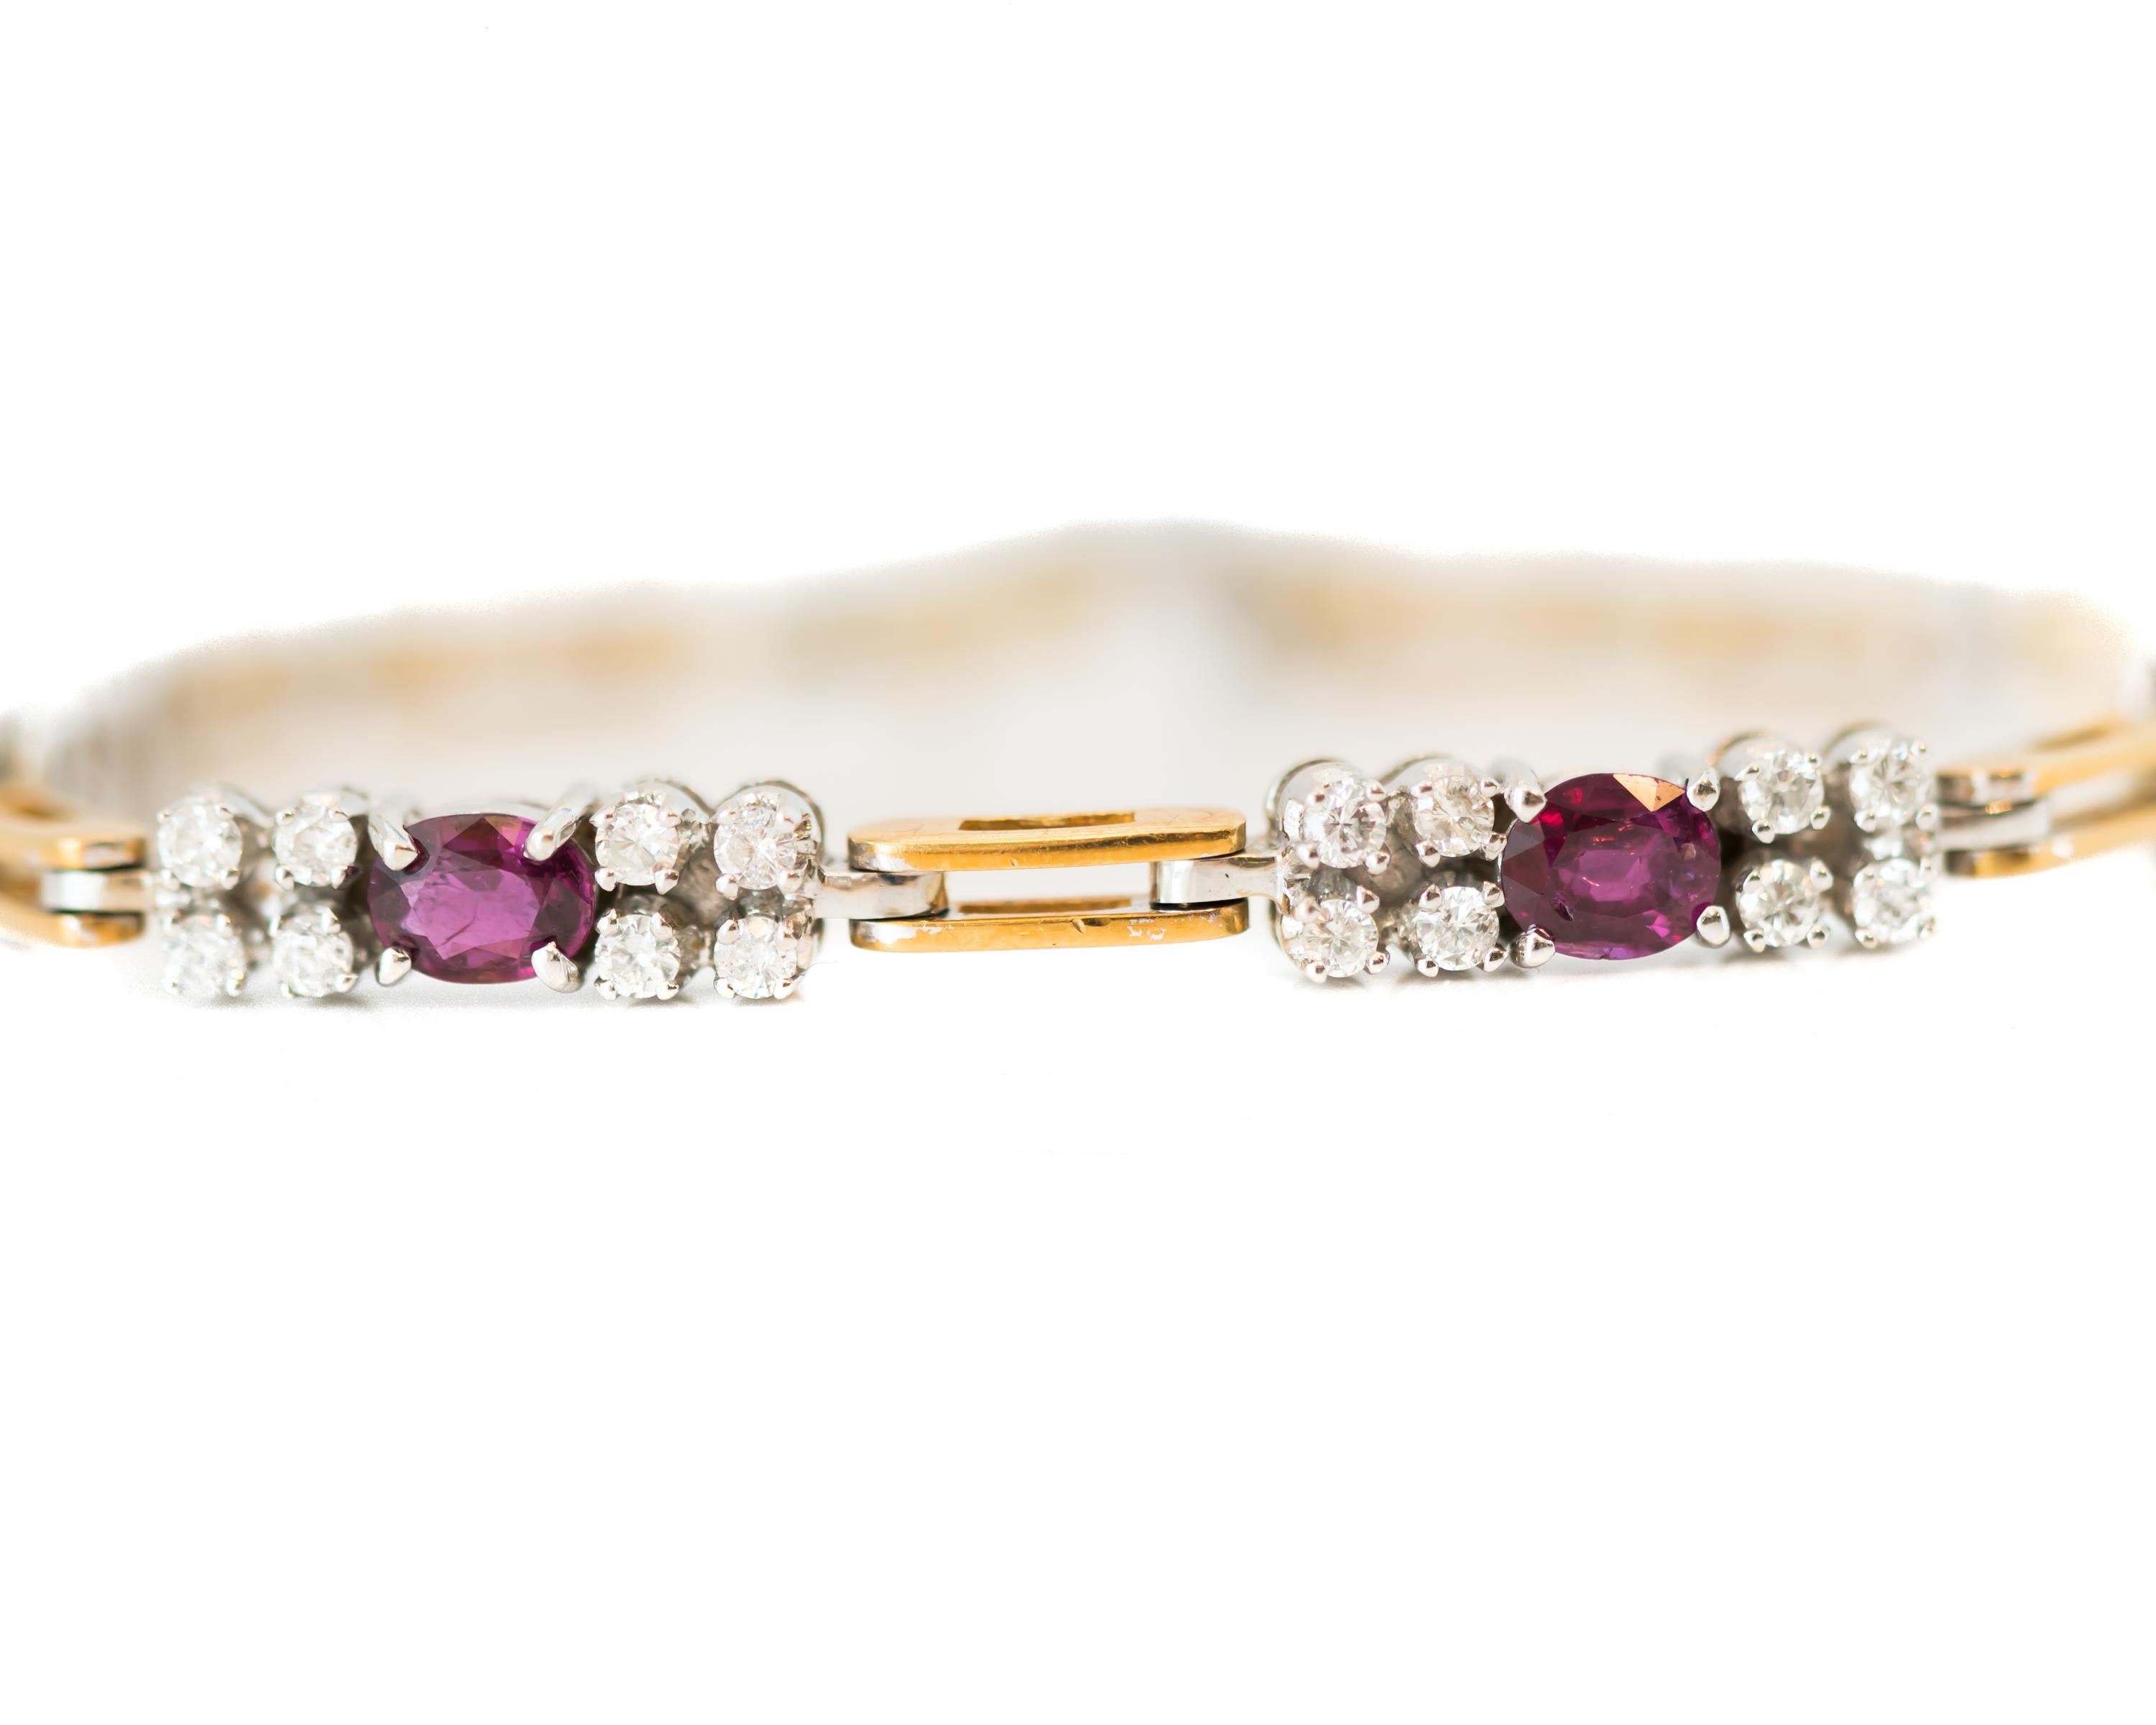 1980s Diamond and Ruby, 18 Karat White and Yellow Gold Two Tone Link Bracelet

Features 32 Round Brilliant Diamonds and 4 Oval Red Rubies. These gorgeous gemstones are set in White Gold and alternate with Yellow Gold links. Each of the 18 Karat